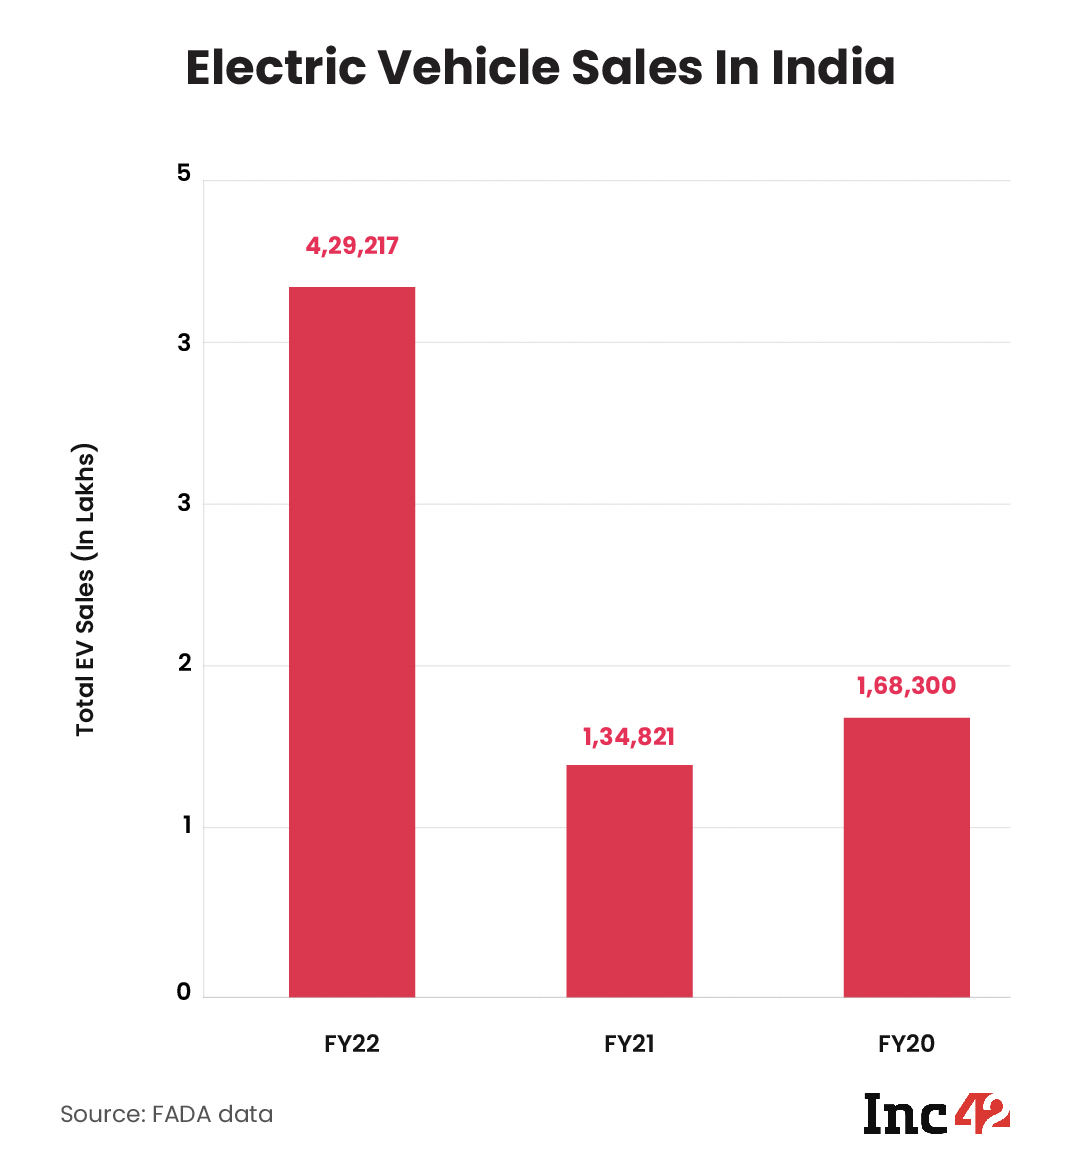 Does India’s Current EV Infrastructure Support The Rising EV Adoption Trend?